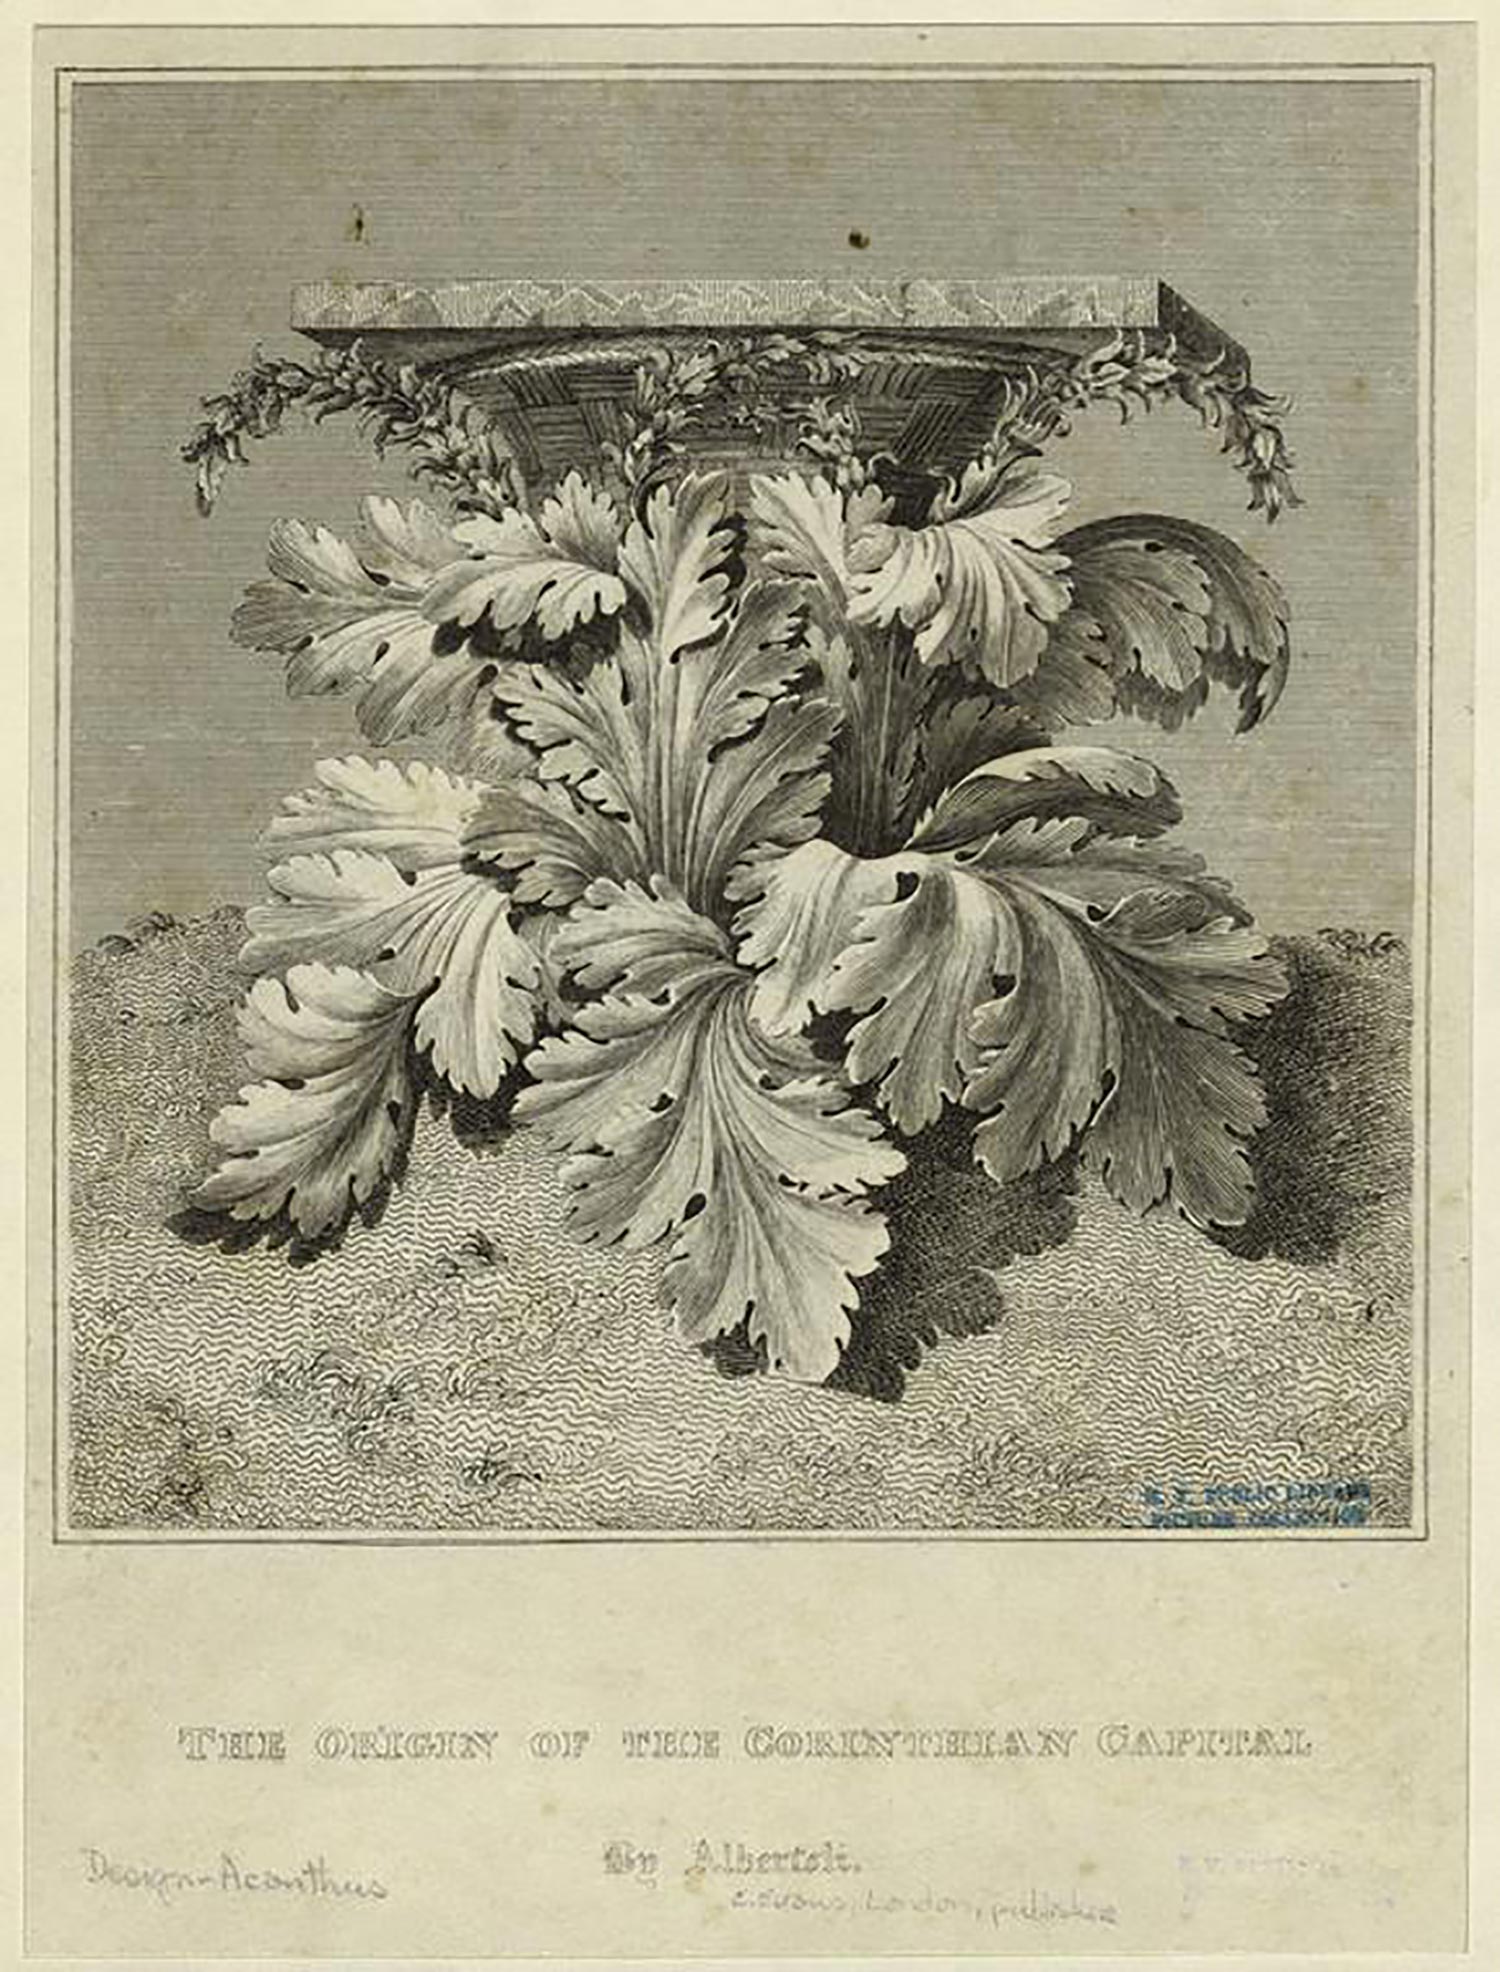 Albertoli, ‘The Origin of the Corinthian Capital.’ London. The Miriam and Ira D. Wallach Division of Art, Prints and Photographs: Picture Collection, The New York Public Library. The Origin of the Corinthian Capital Retrieved from https://digitalcollections.nypl.org/items/510d47e1-0002-a3d9-e040-e00a18064a99